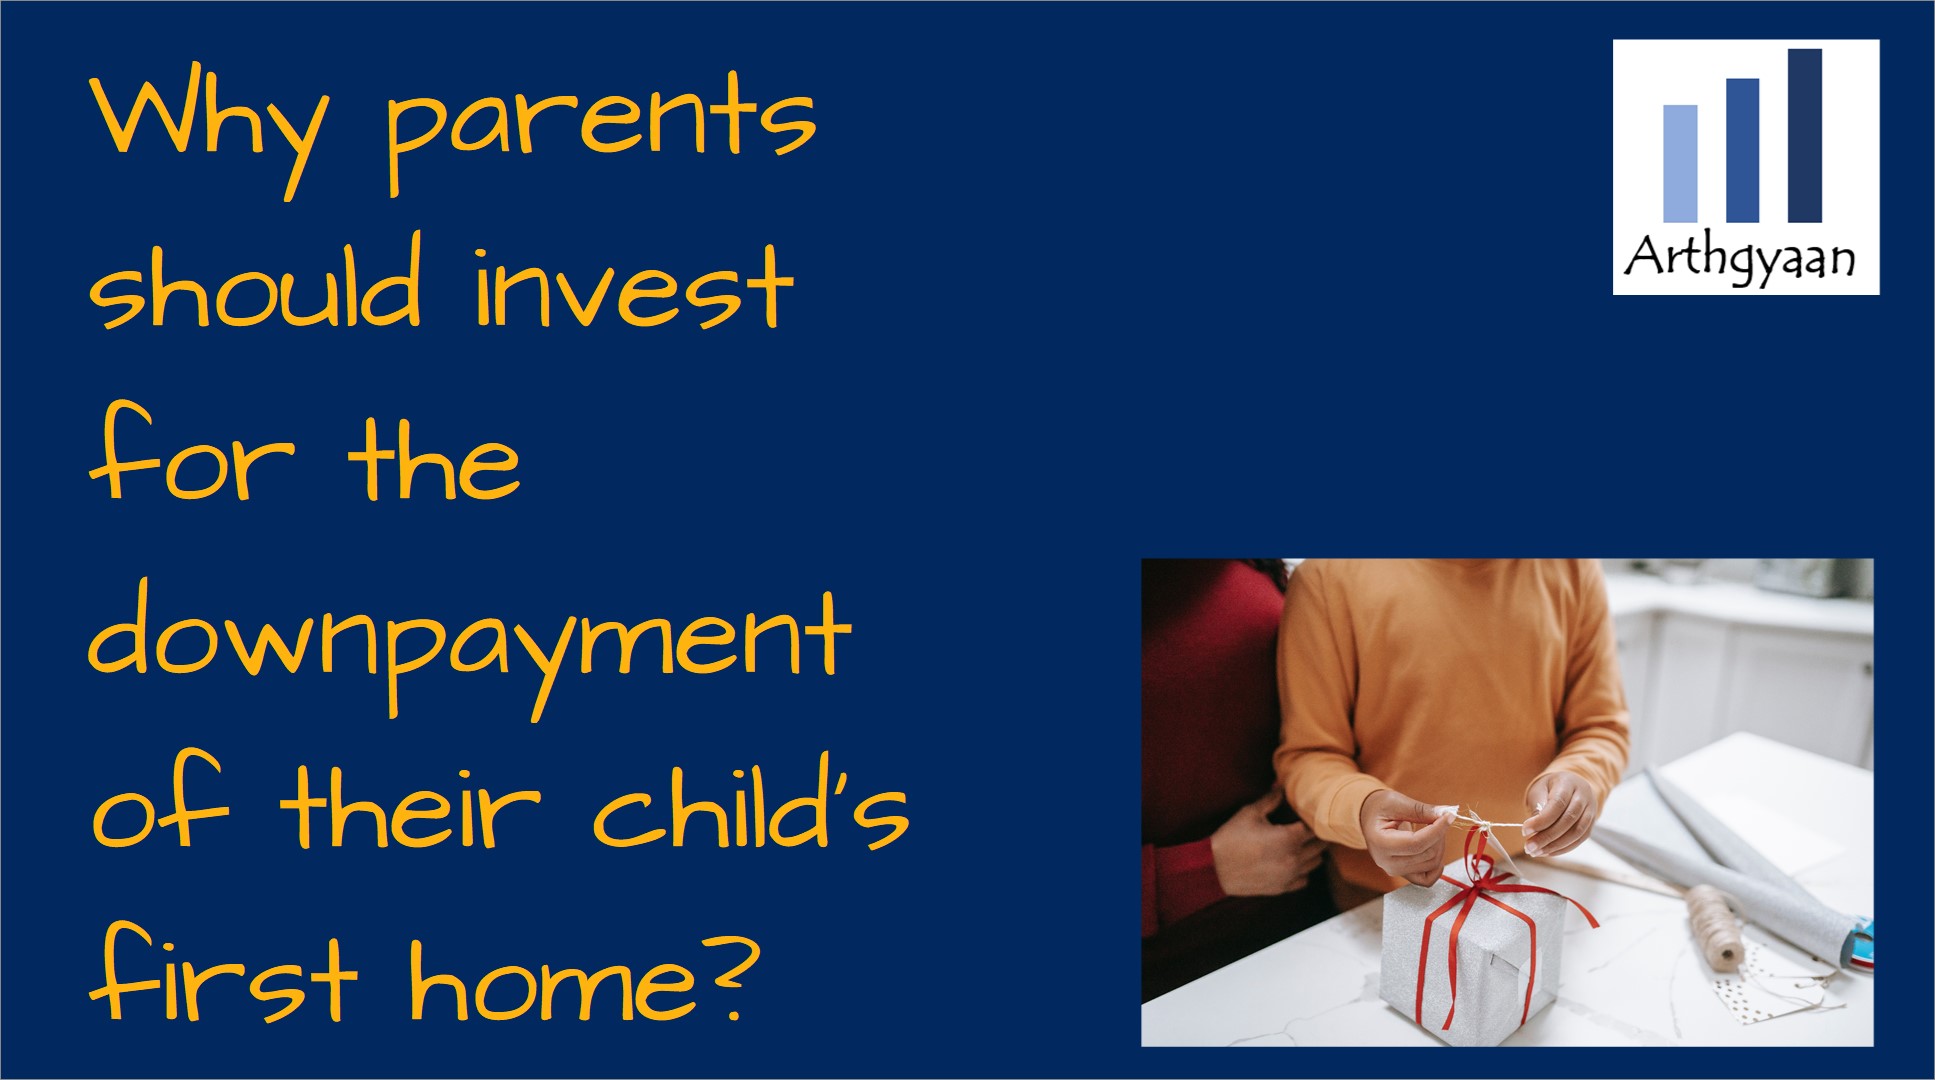 Why parents should invest for the downpayment of their child's first home?